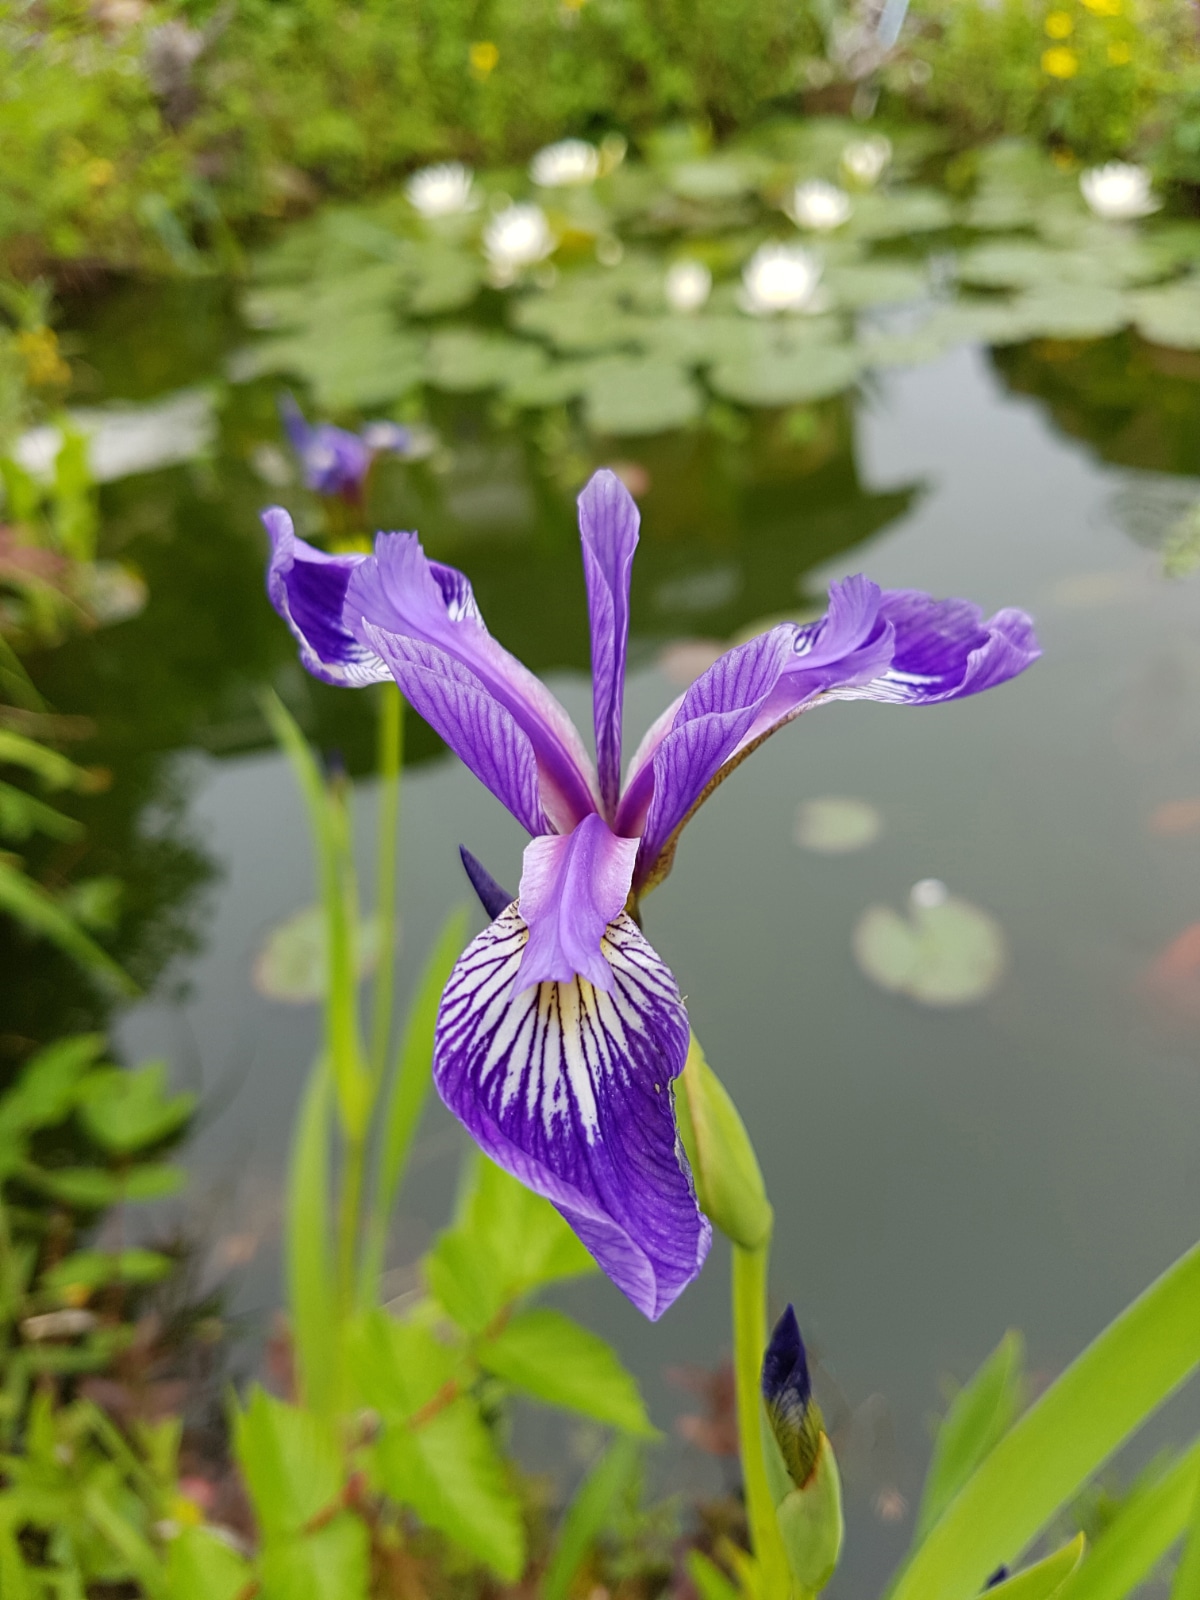 Water Iris is a burst of color